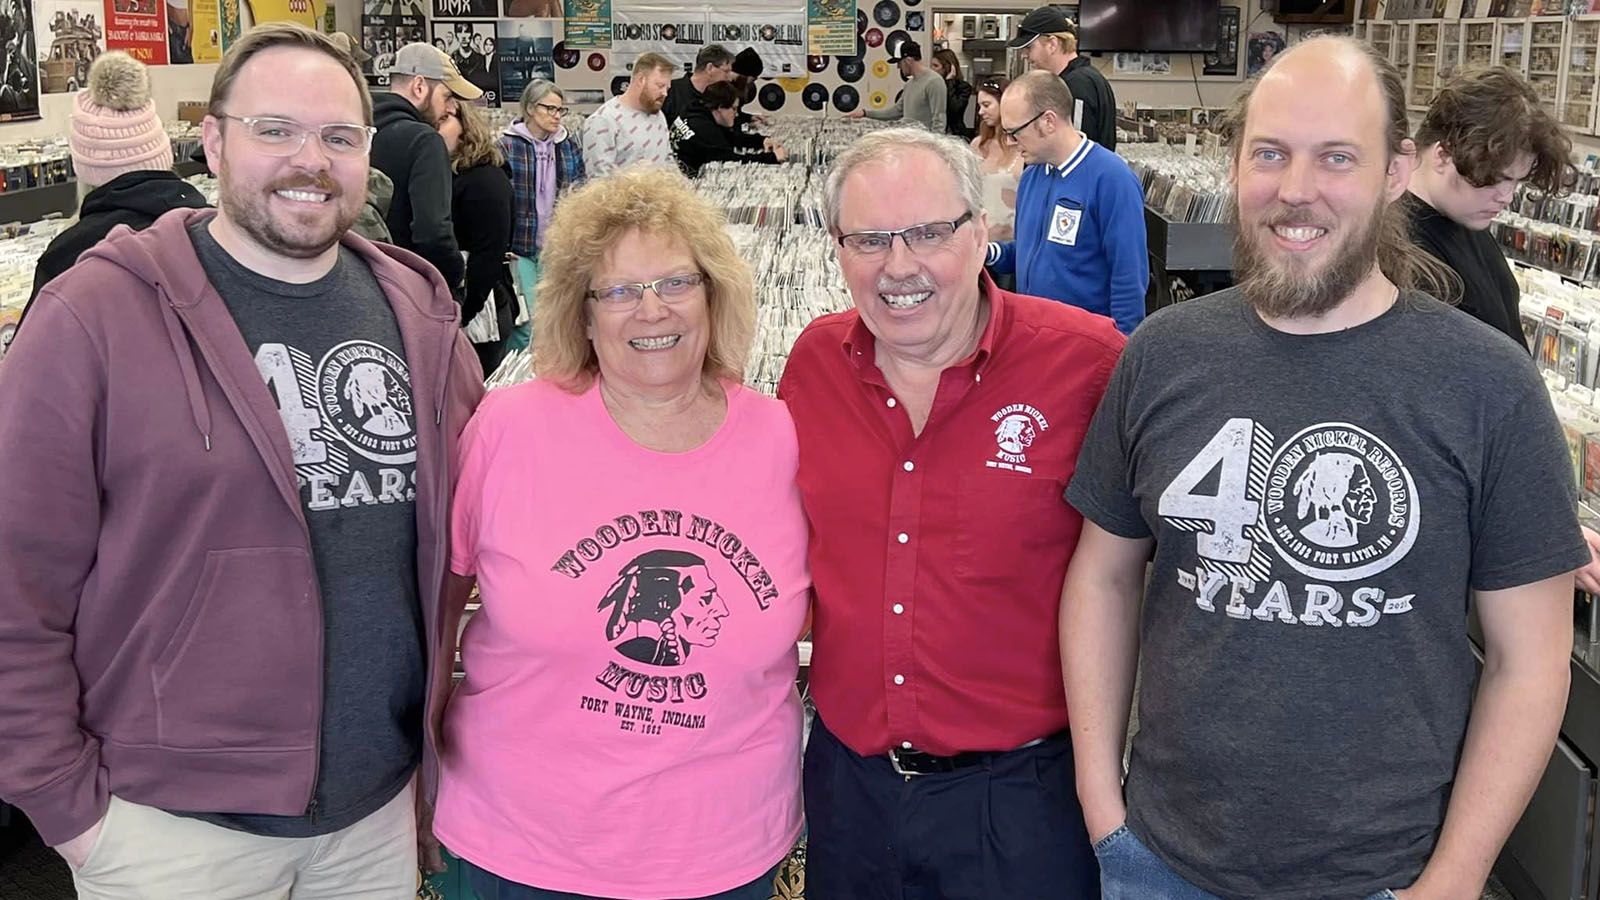 Following his retirement, former Wooden Nickel Records owner Bob Roets will have more time to spend with his family, from left, son Andy Roets, wife Cindy Roets, and son and new Wooden Nickel Records owner Christopher Roets.